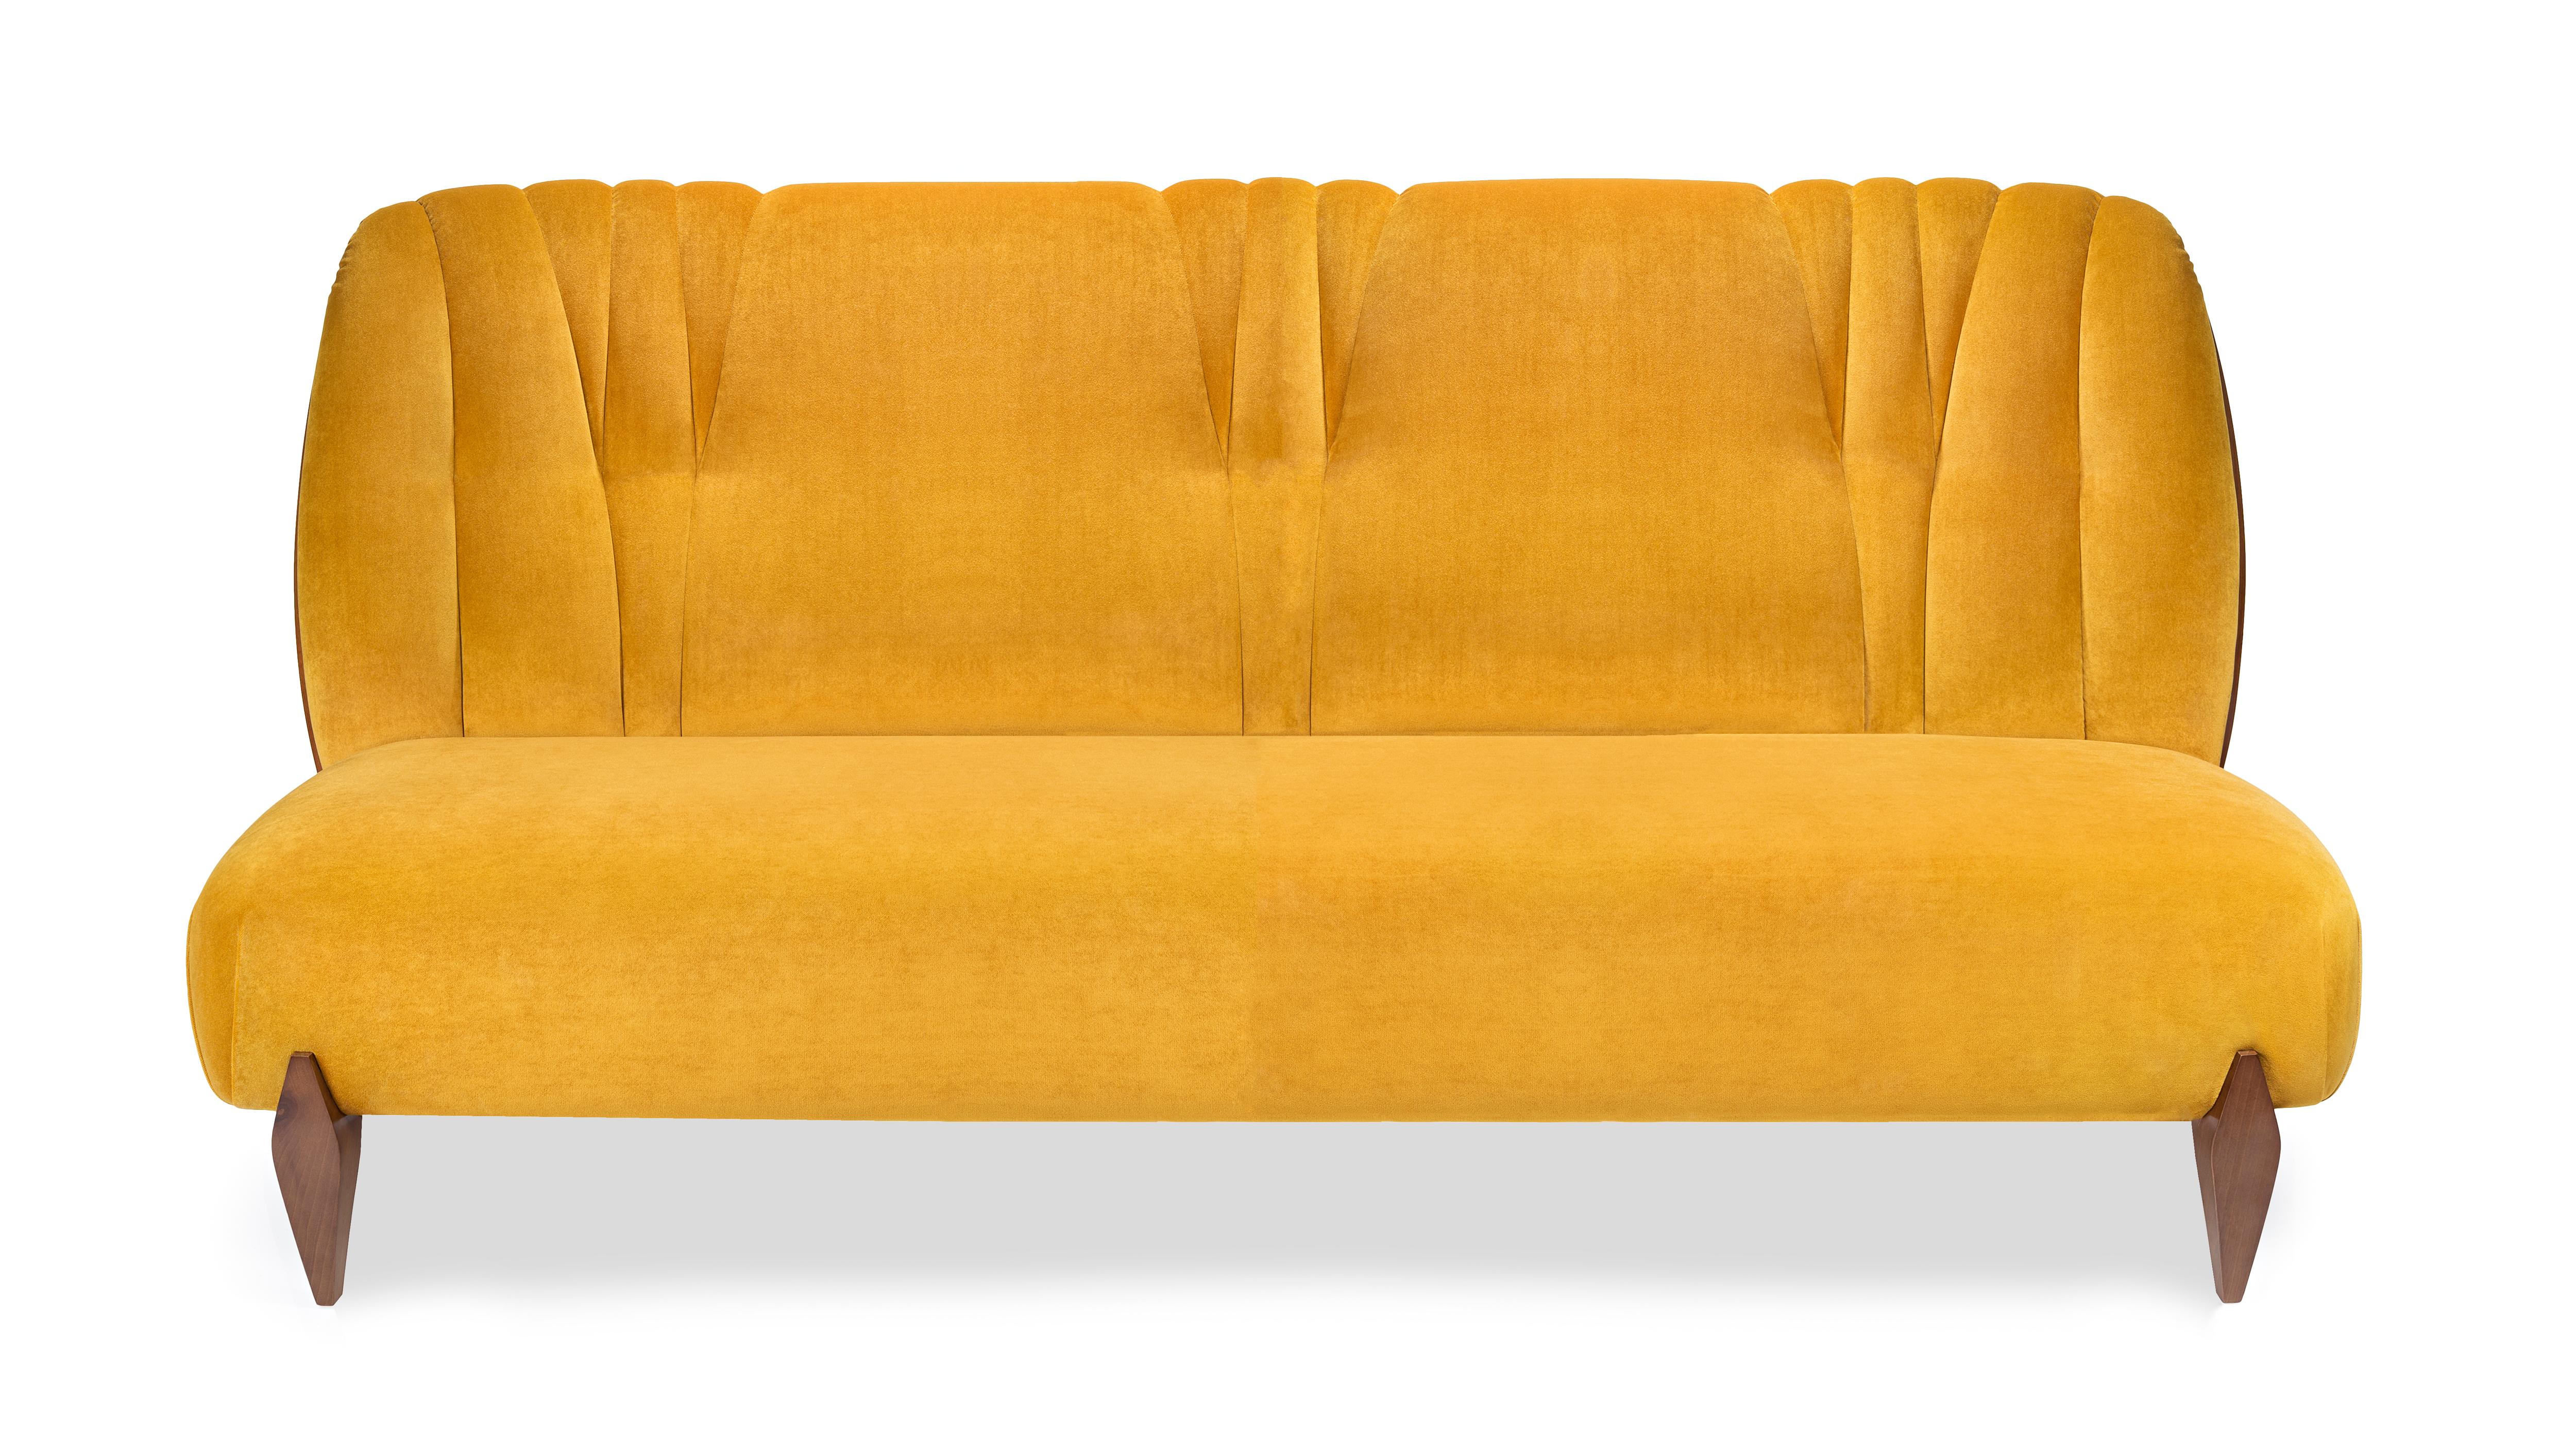 Na Pali means “the cliffs” and is a breathtaking landscape located on Kauai, a volcanic island resulting from the rain and the blasts of winter waves against the cliffs.
Inspired by Mother Nature, the Na Pali sofa portrays in detail the mystique of